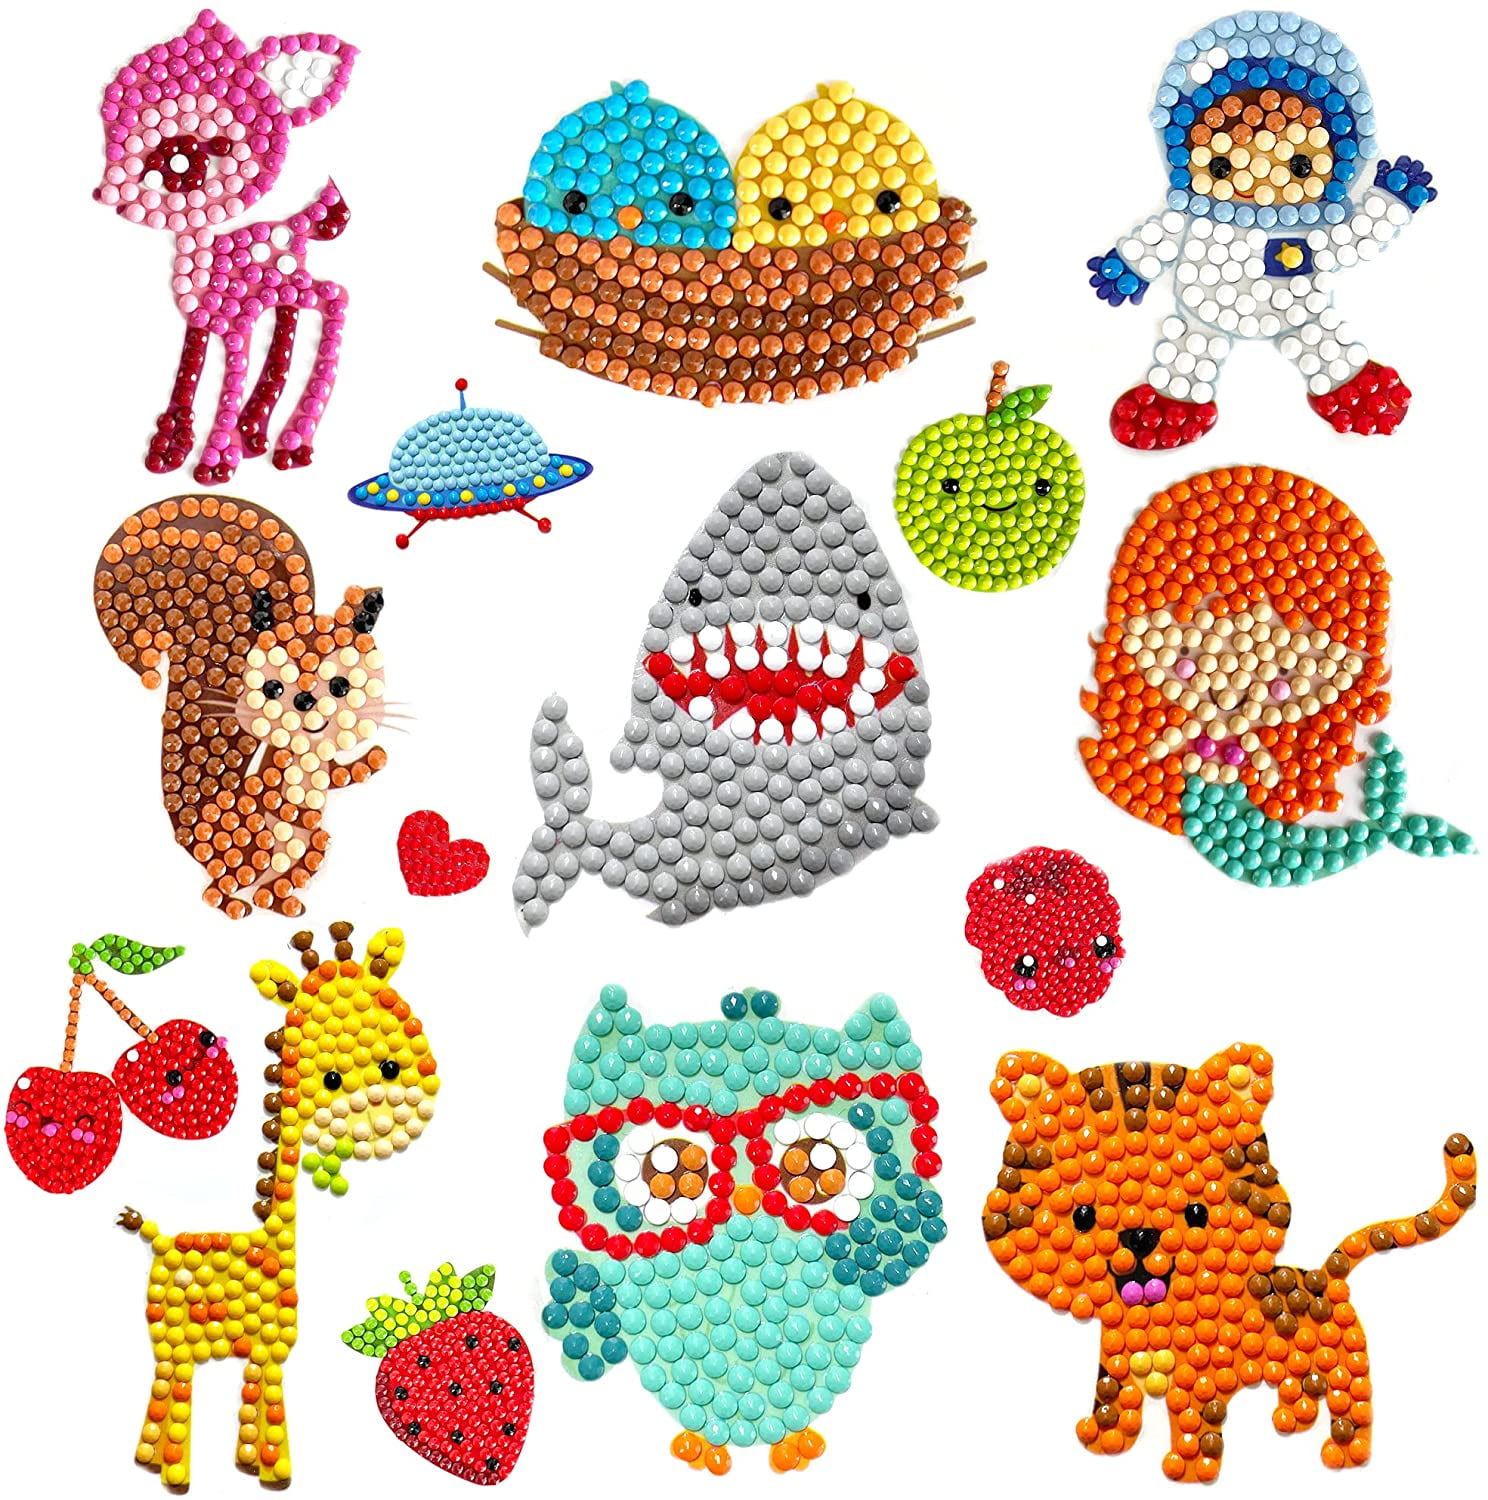 Sinceroduct 5D DIY Diamond Painting Craft Kits for Kids, 18 Pcs Cartoon Stickers, Stick Paint with Diamonds by Numbers, Cute Insect, Animals